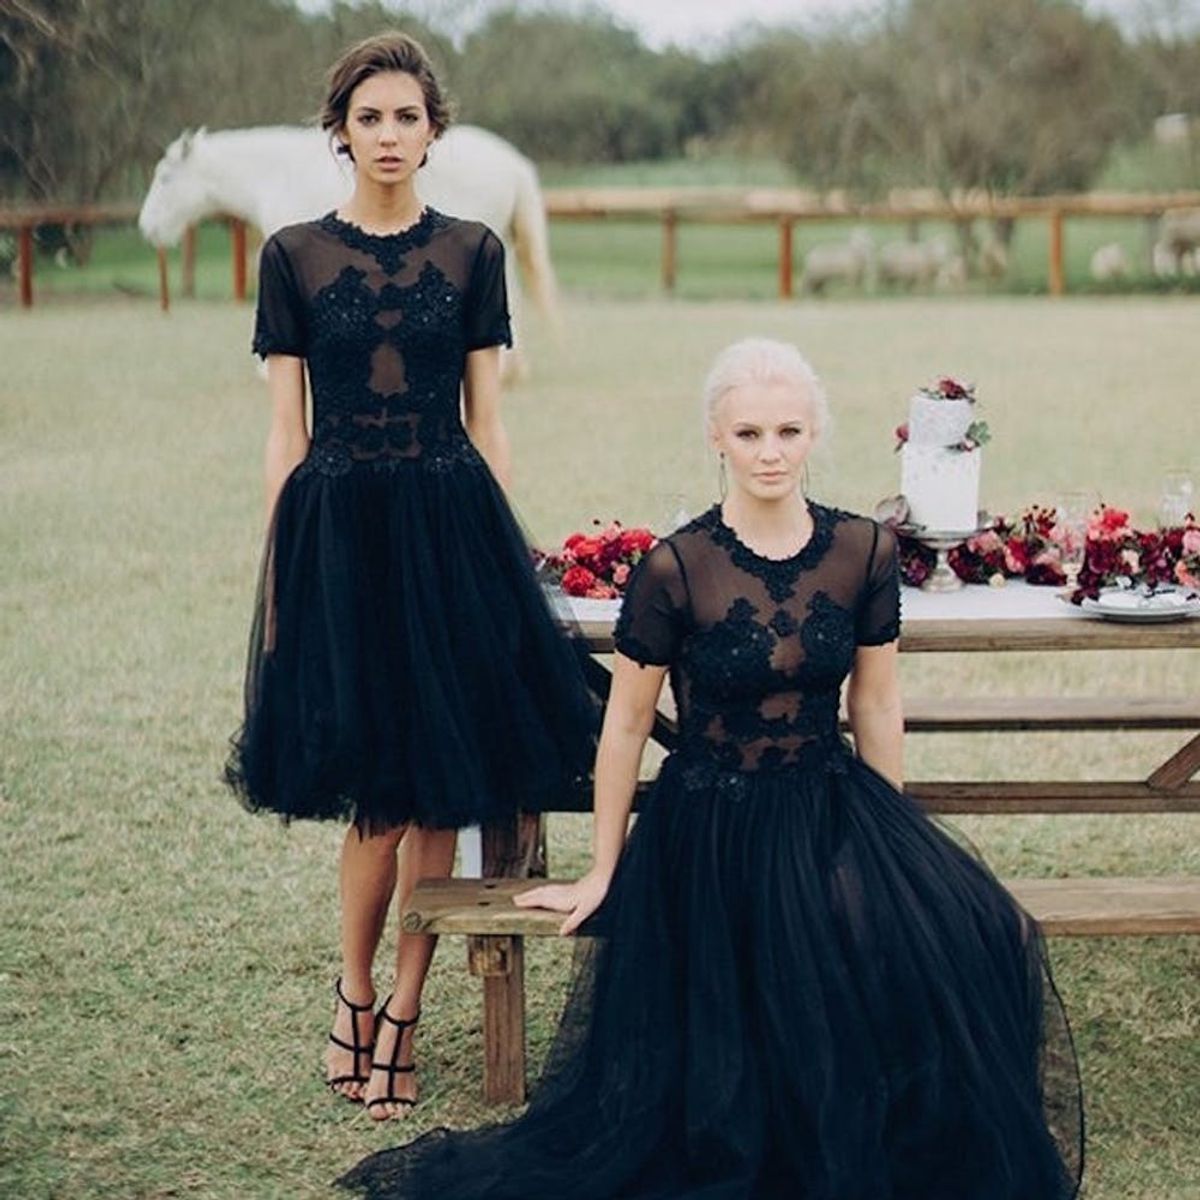 17 Chic Halloween Wedding Decor Ideas That Are To Die For